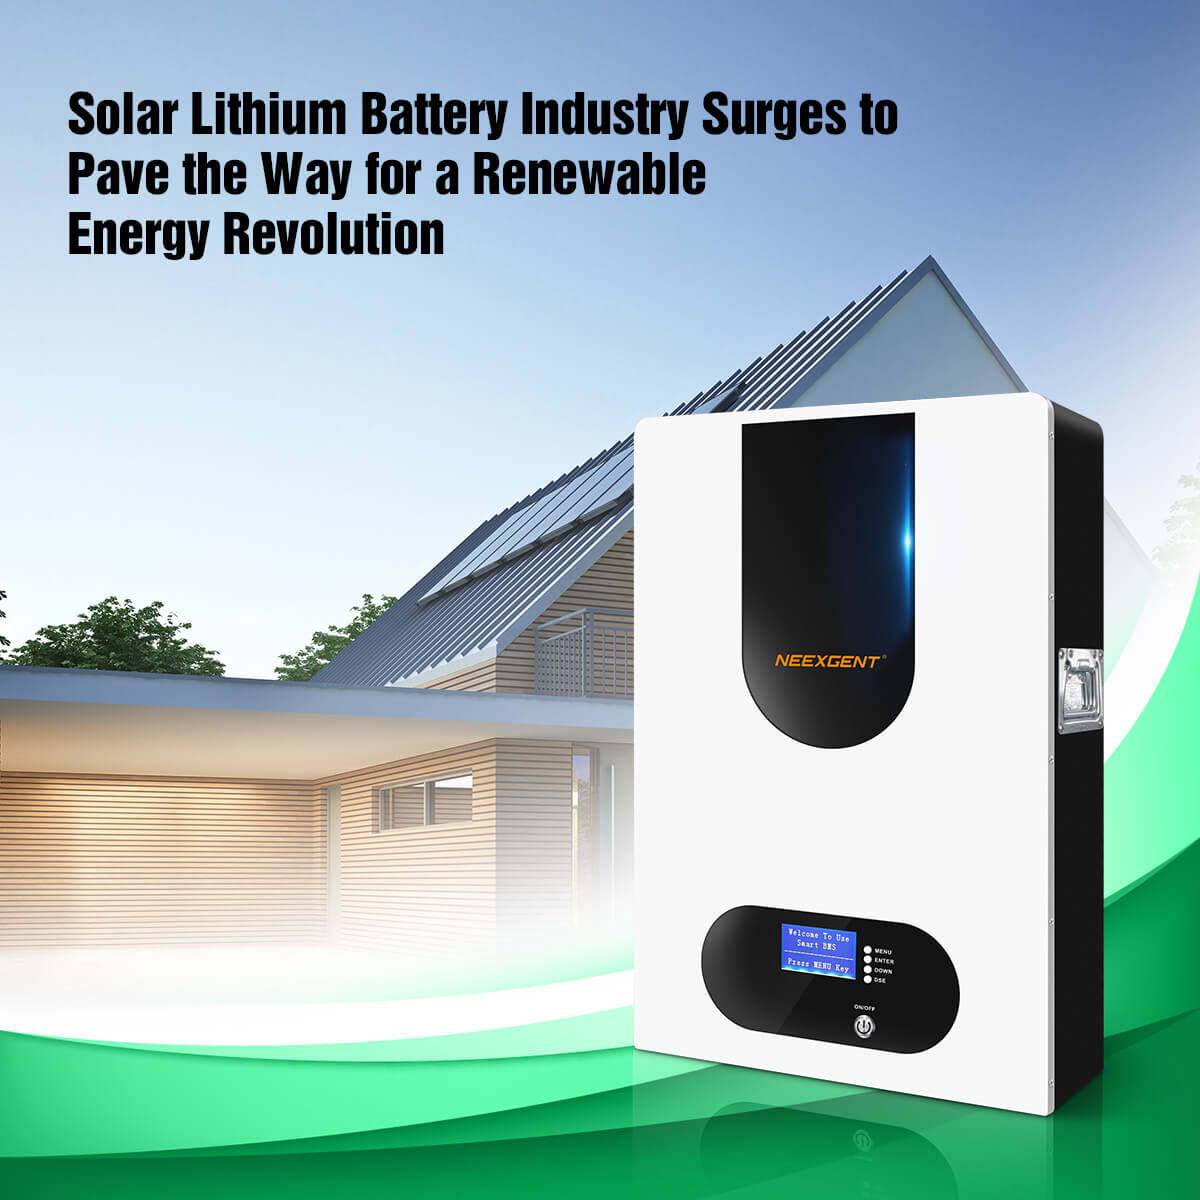 Solar Lithium Battery Industry Surges to Pave the Way for a Renewable Energy Revolution